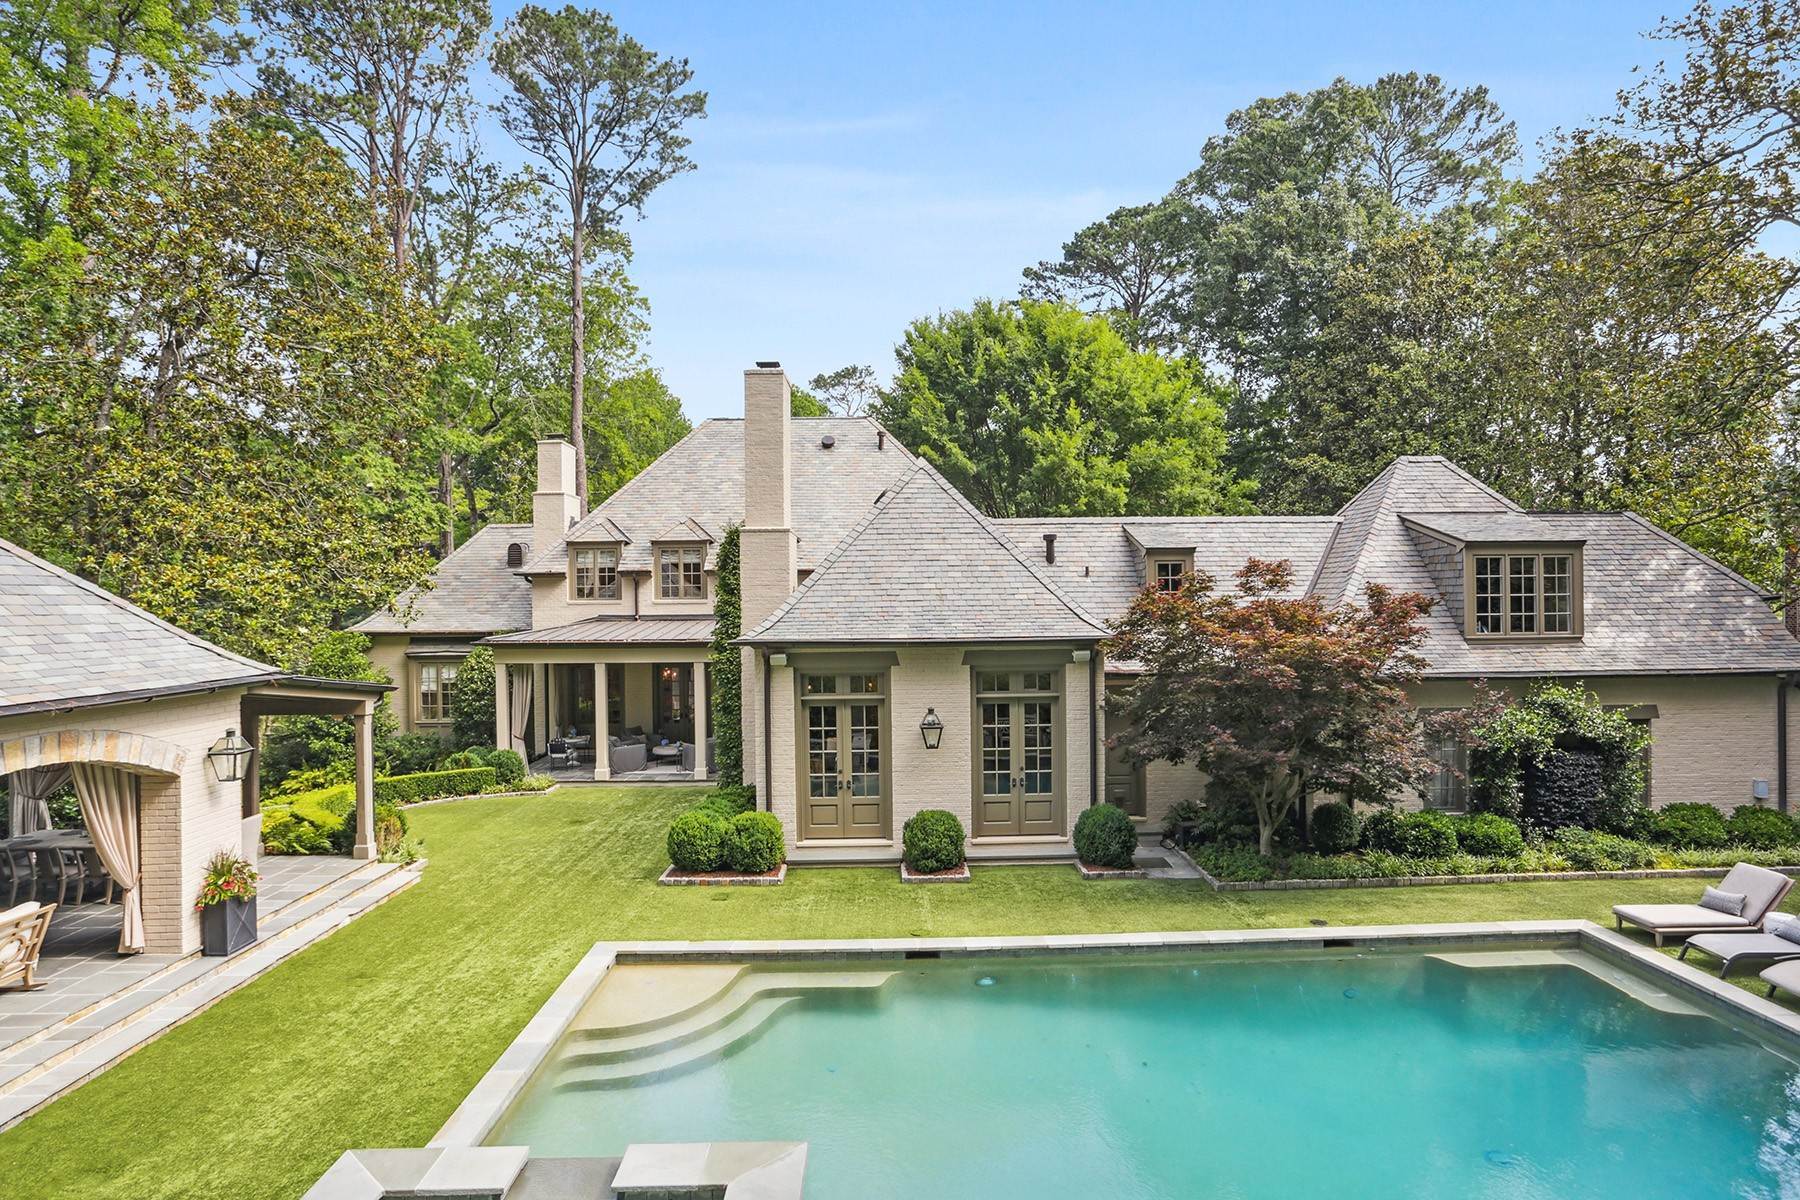 39. Single Family Homes for Sale at Gorgeous Home on 1.5+/- Acres in Sought-after Tuxedo Park 358 King Road Atlanta, Georgia 30342 United States